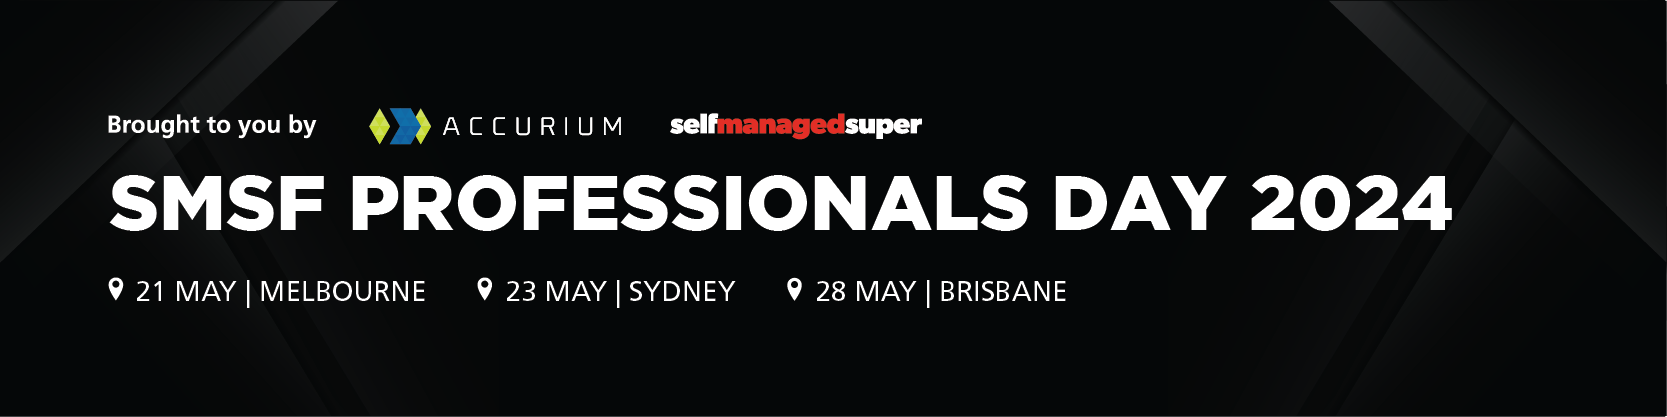 SMSF Professionals Day